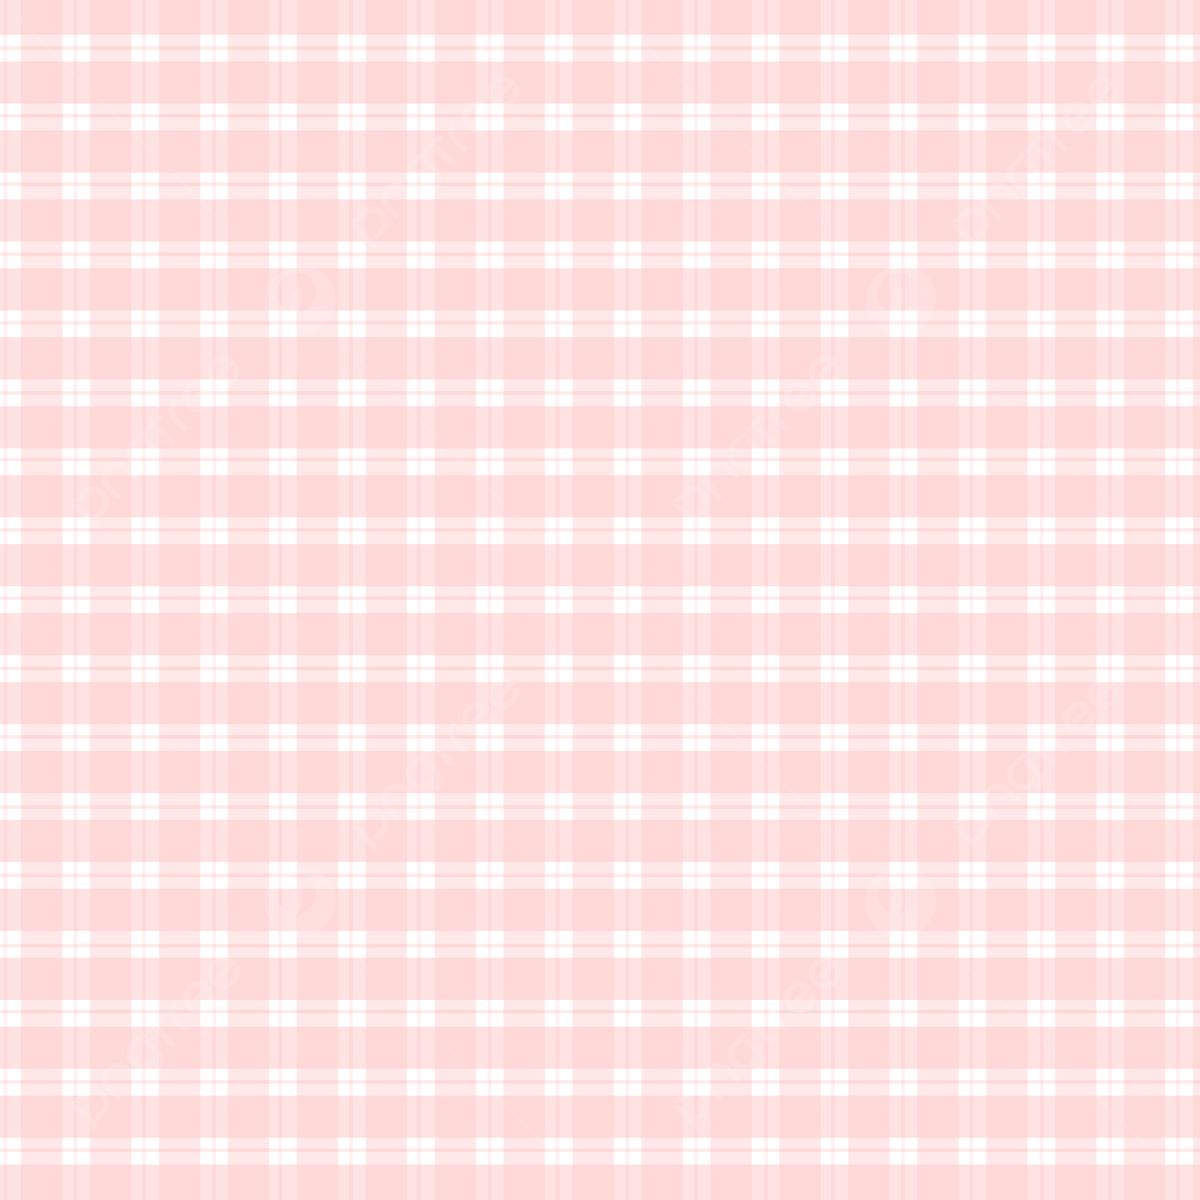 A pink and white checkered pattern - Grid